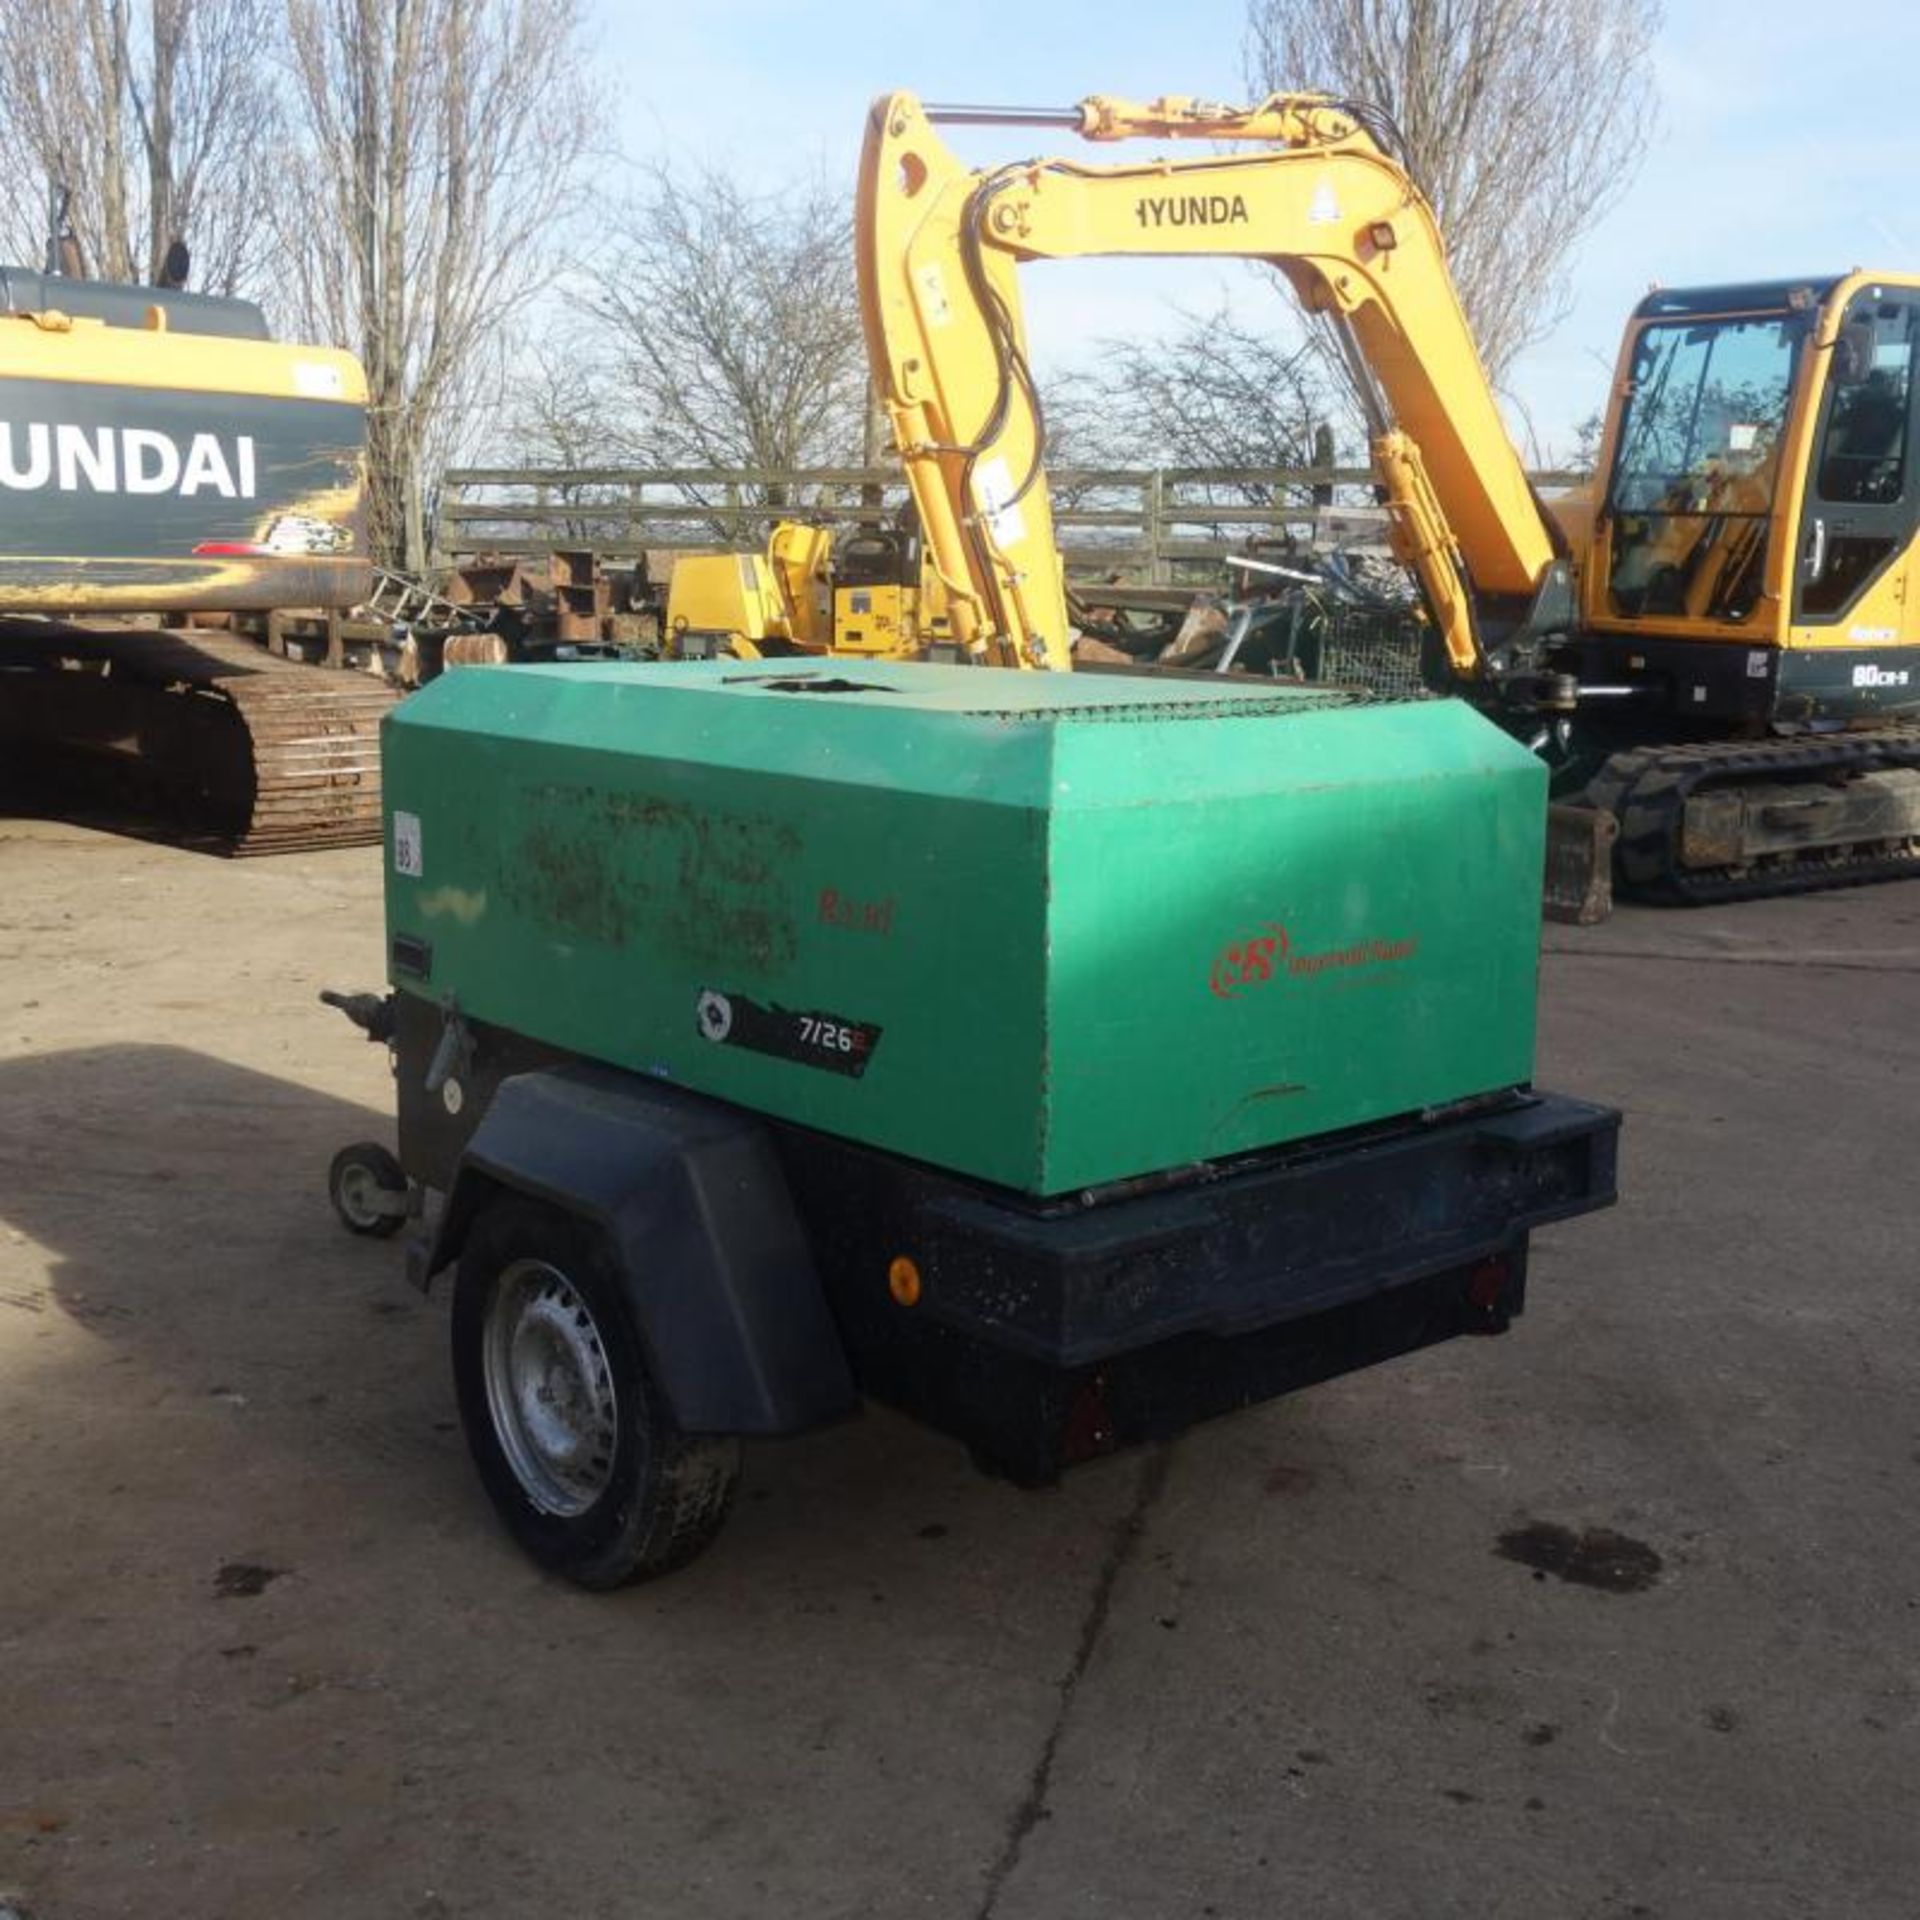 2006 Inersollrand 726e Compressor, Only 3702 Hours From New - Image 3 of 5